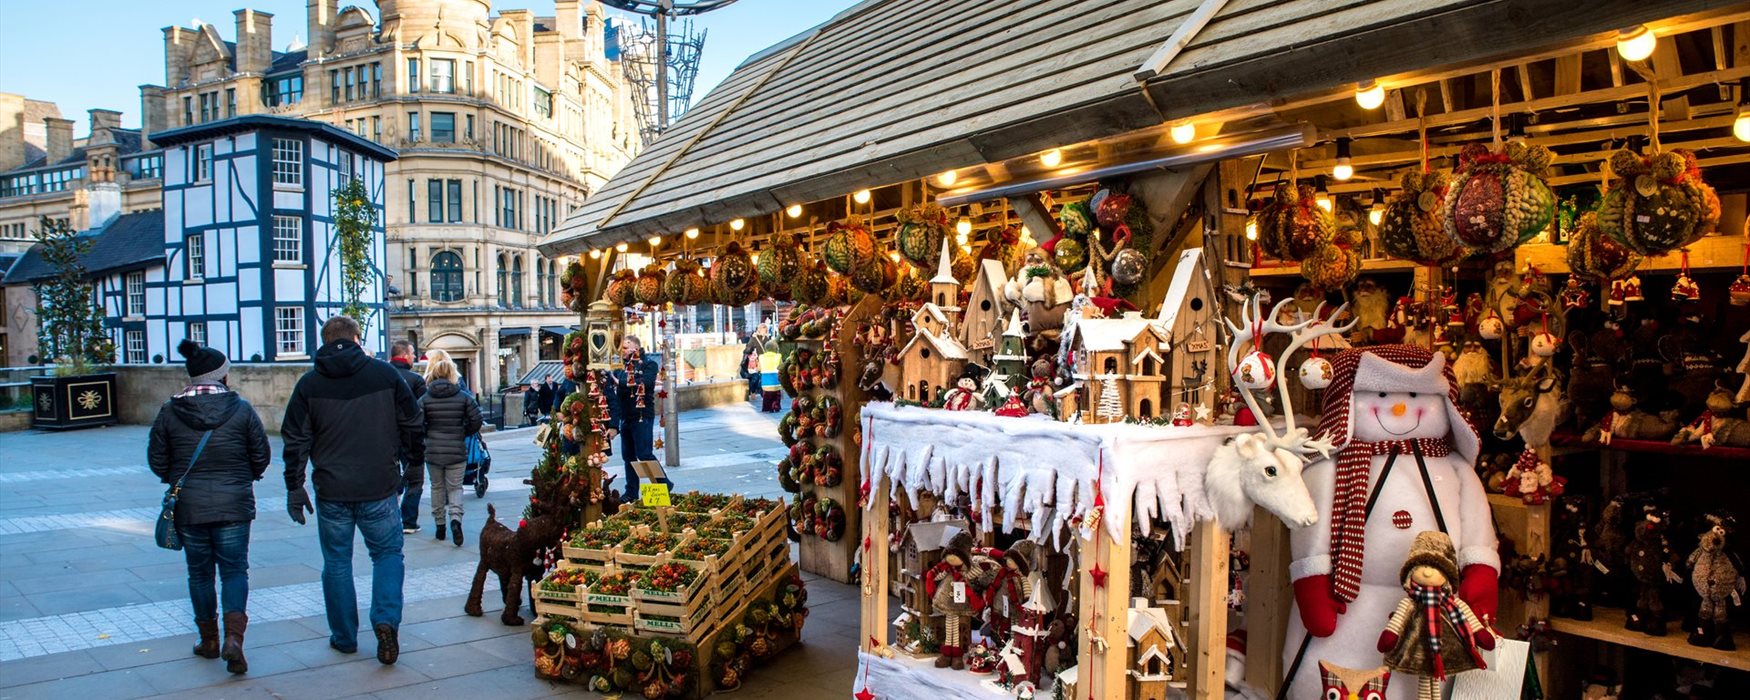 christmas markets near M&S and Exchange Square